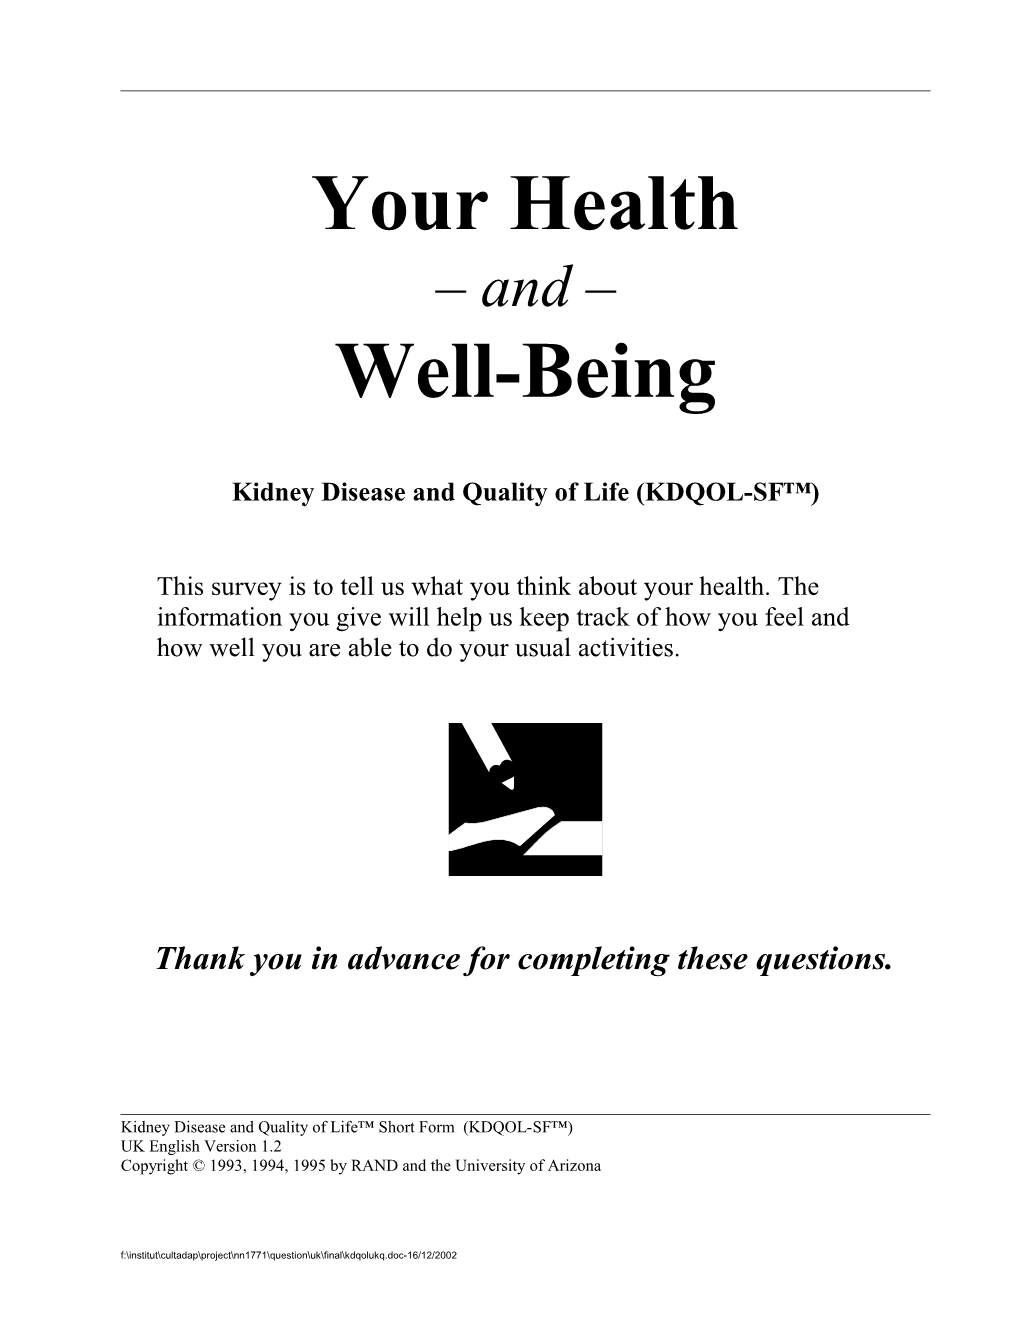 Your Health and Well-Being